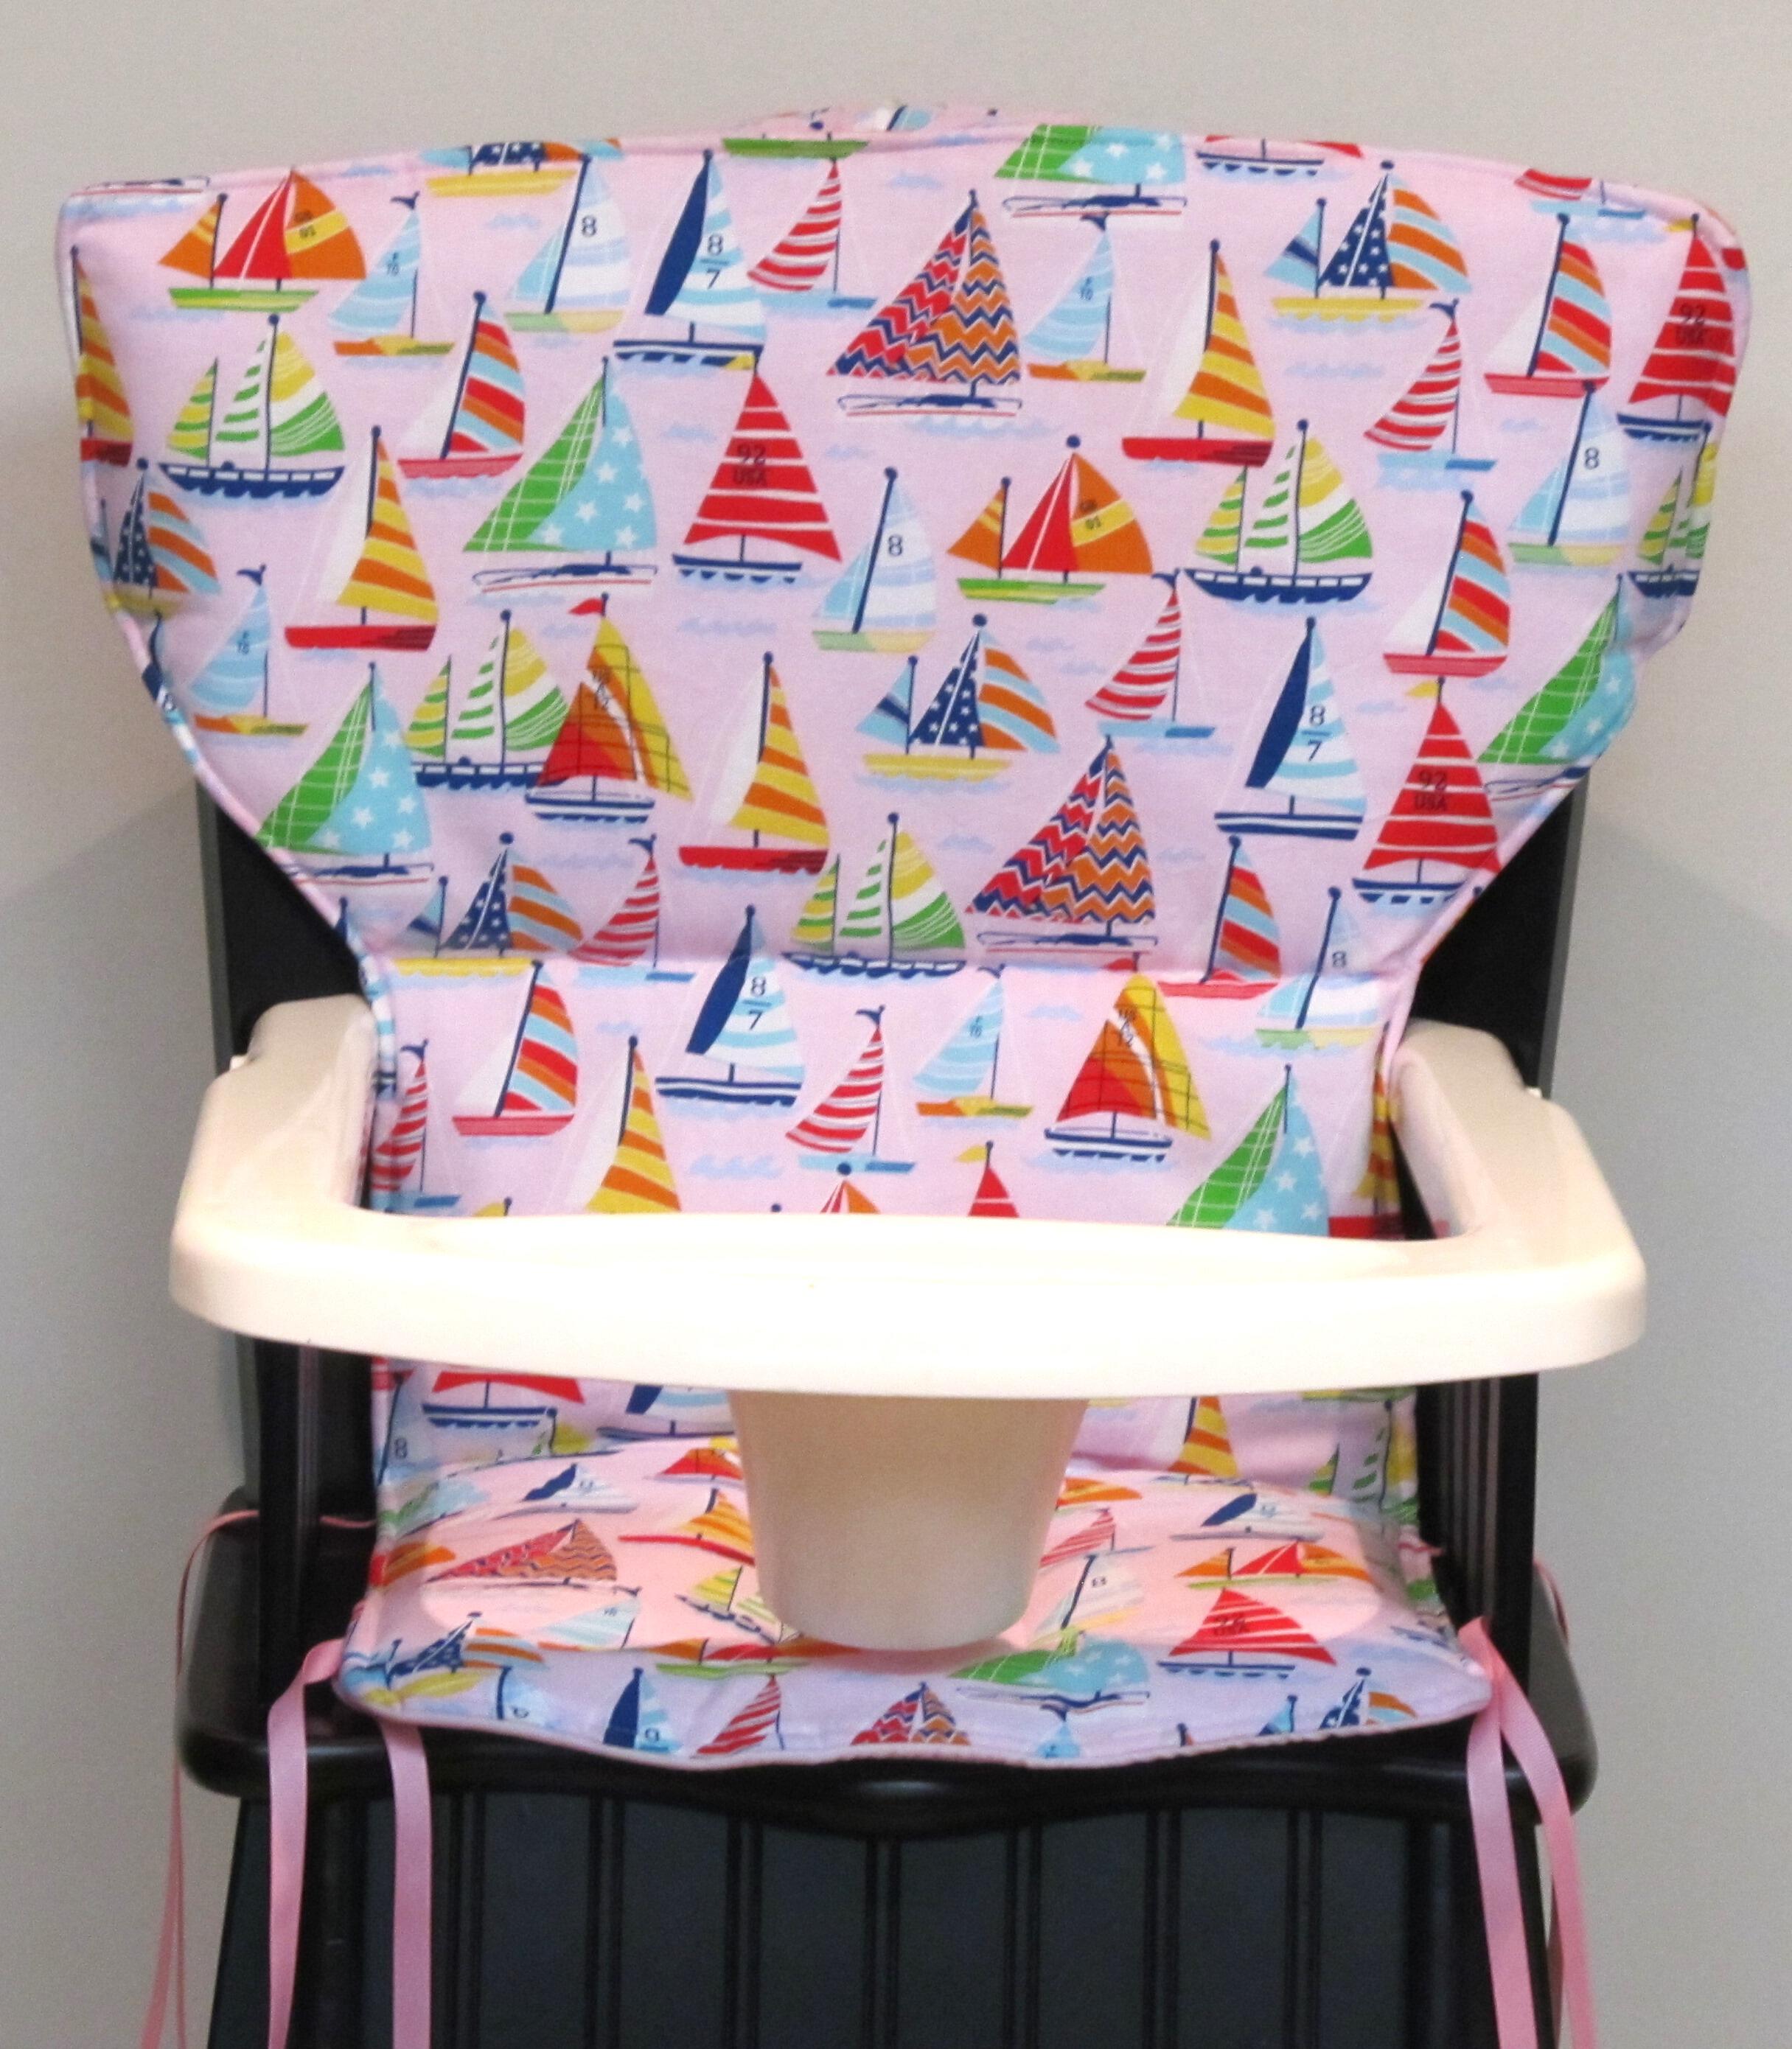 Newport style Eddie Bauer wooden highchair cushion, handmade in the USA, sailboats on pink